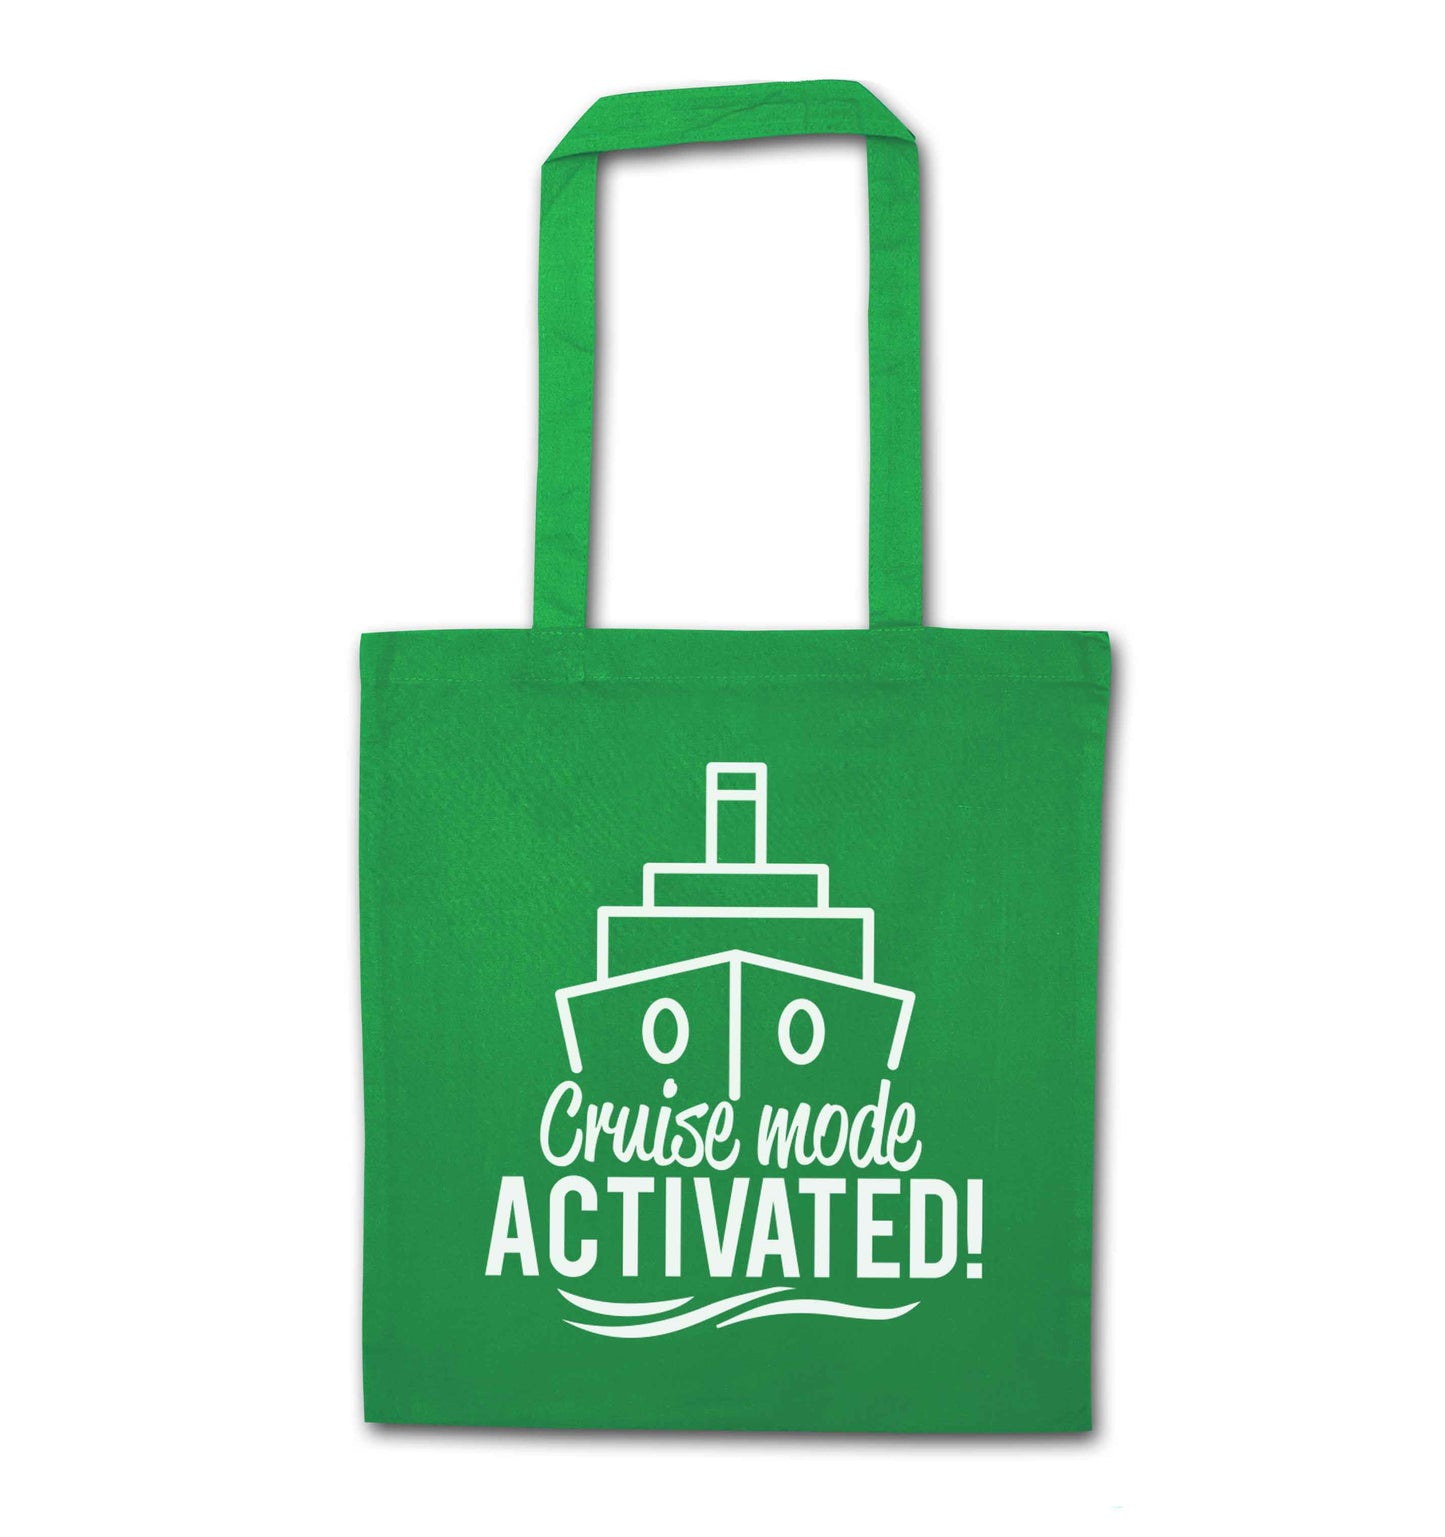 Cruise mode activated green tote bag